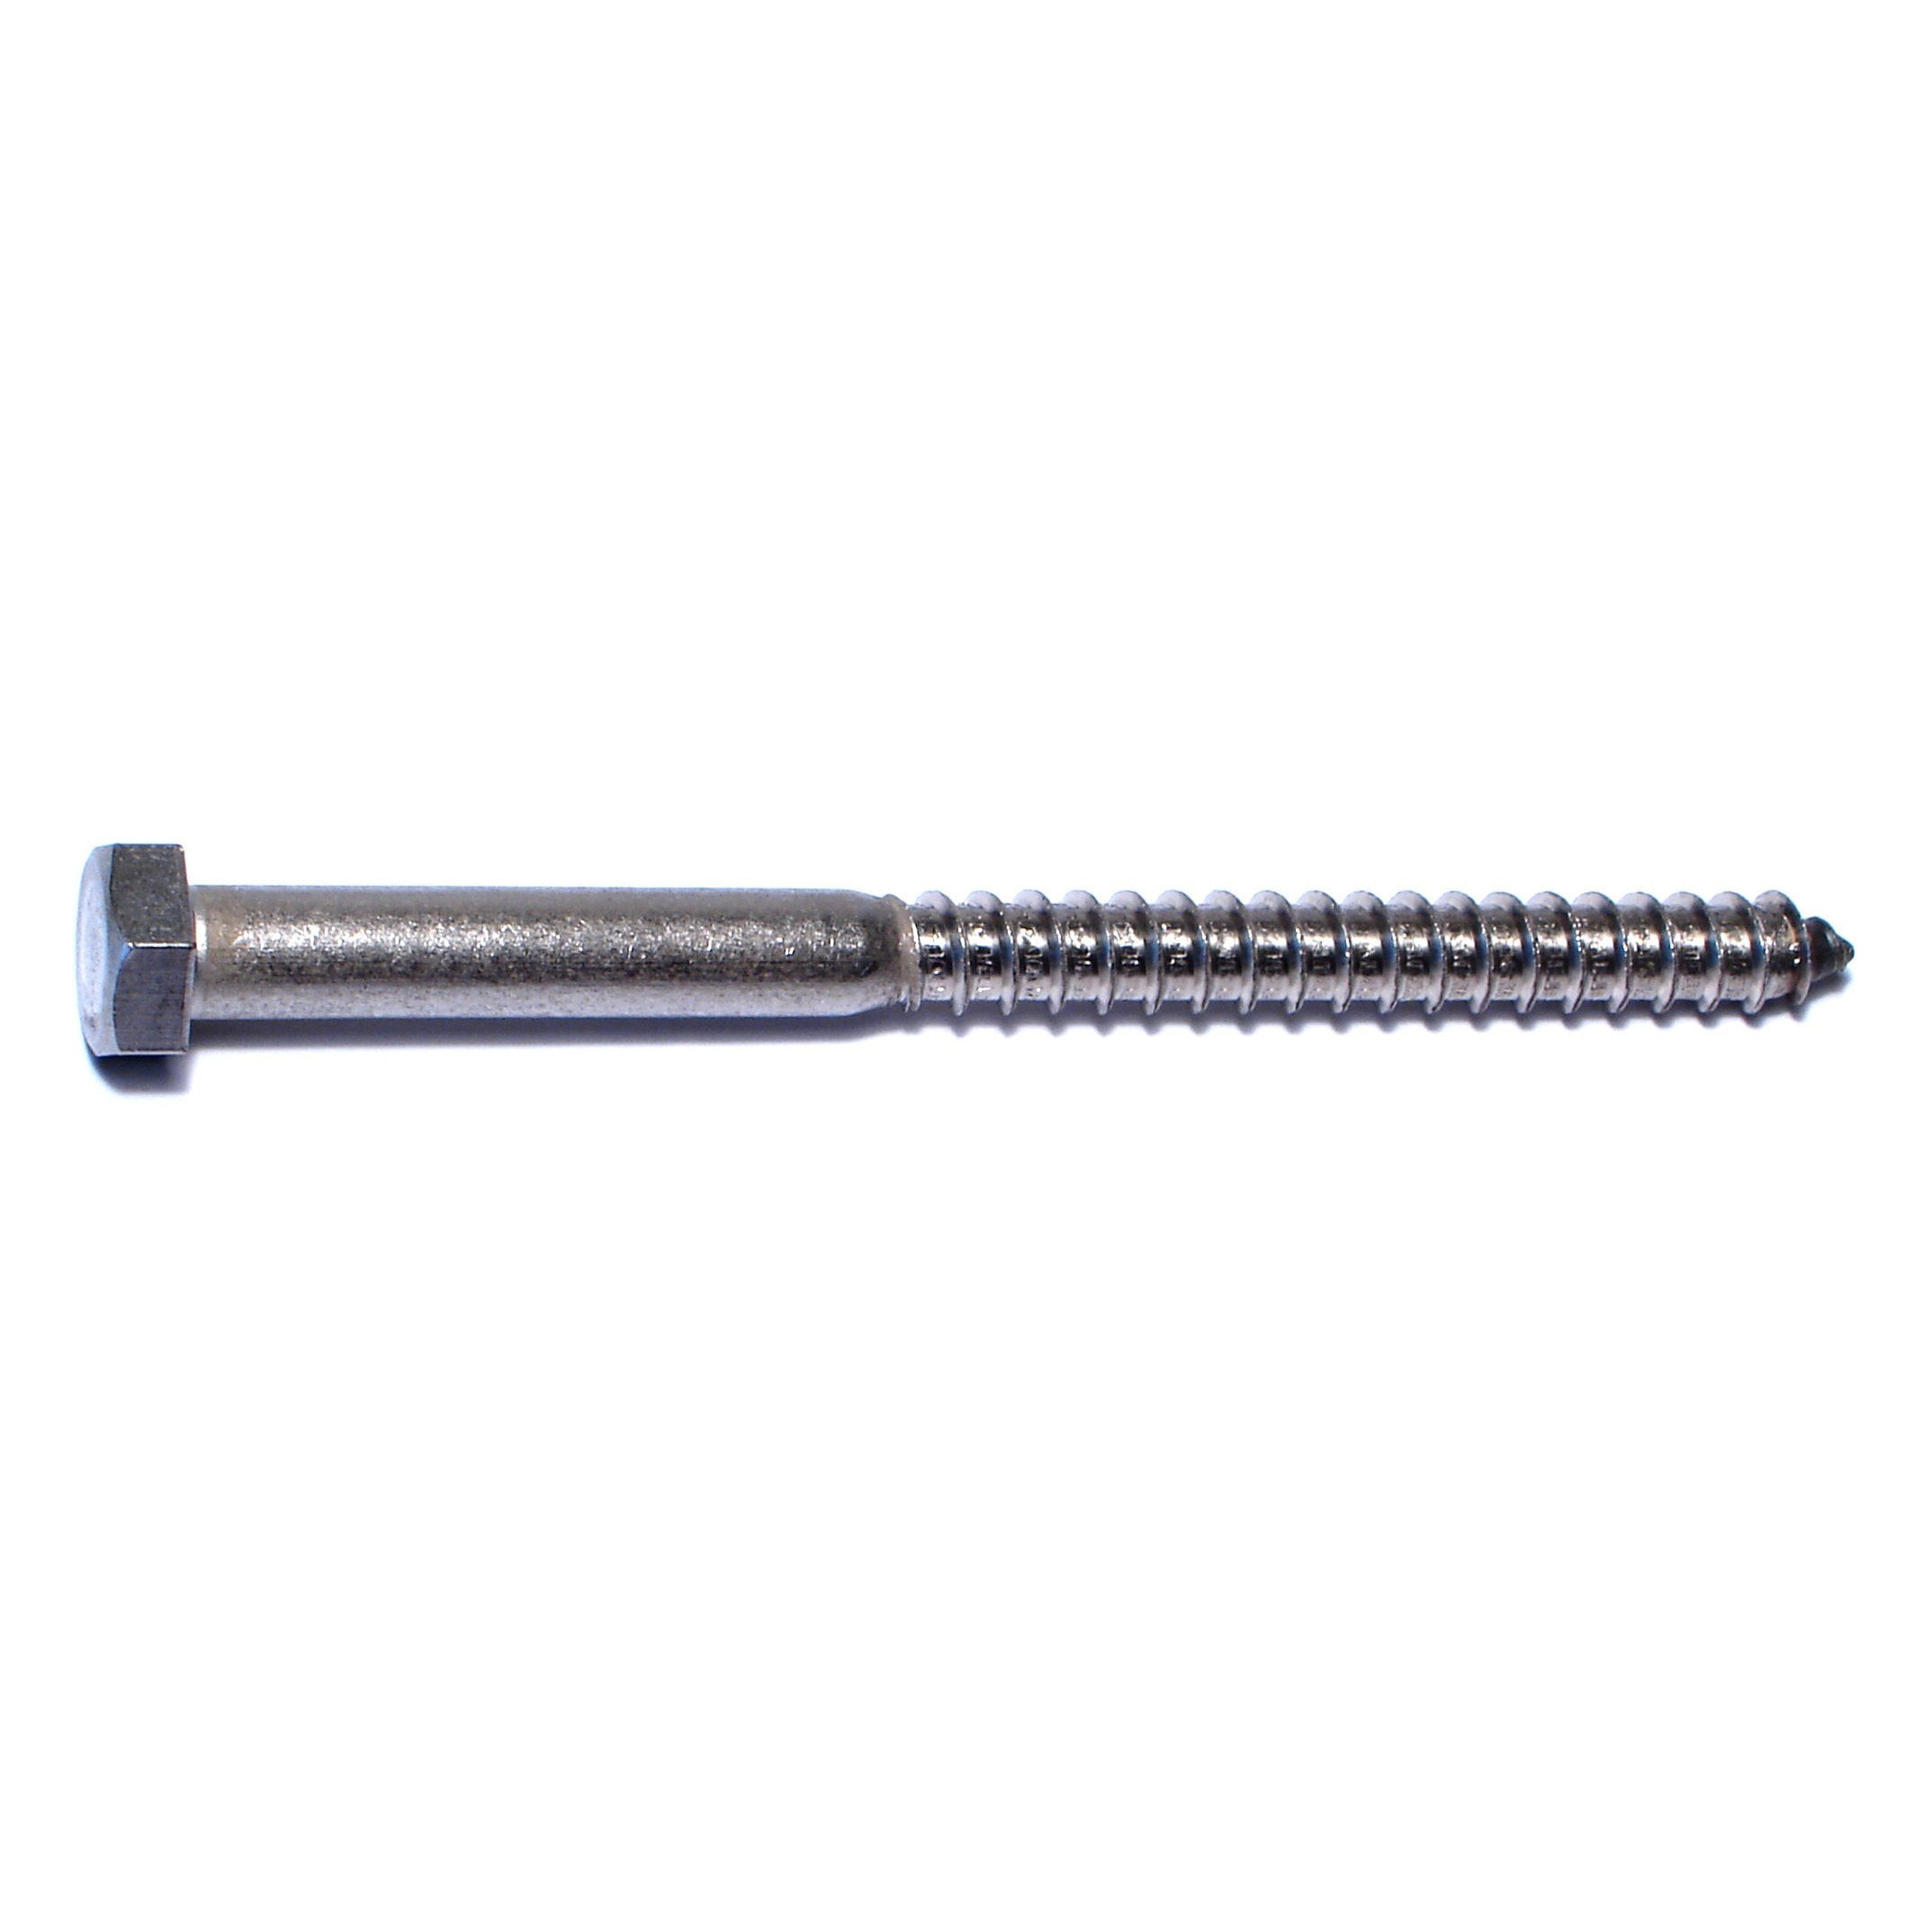 QTY 100 Select Length 3/8" Stainless Steel Lag Screws Hex Head Lag Bolts 